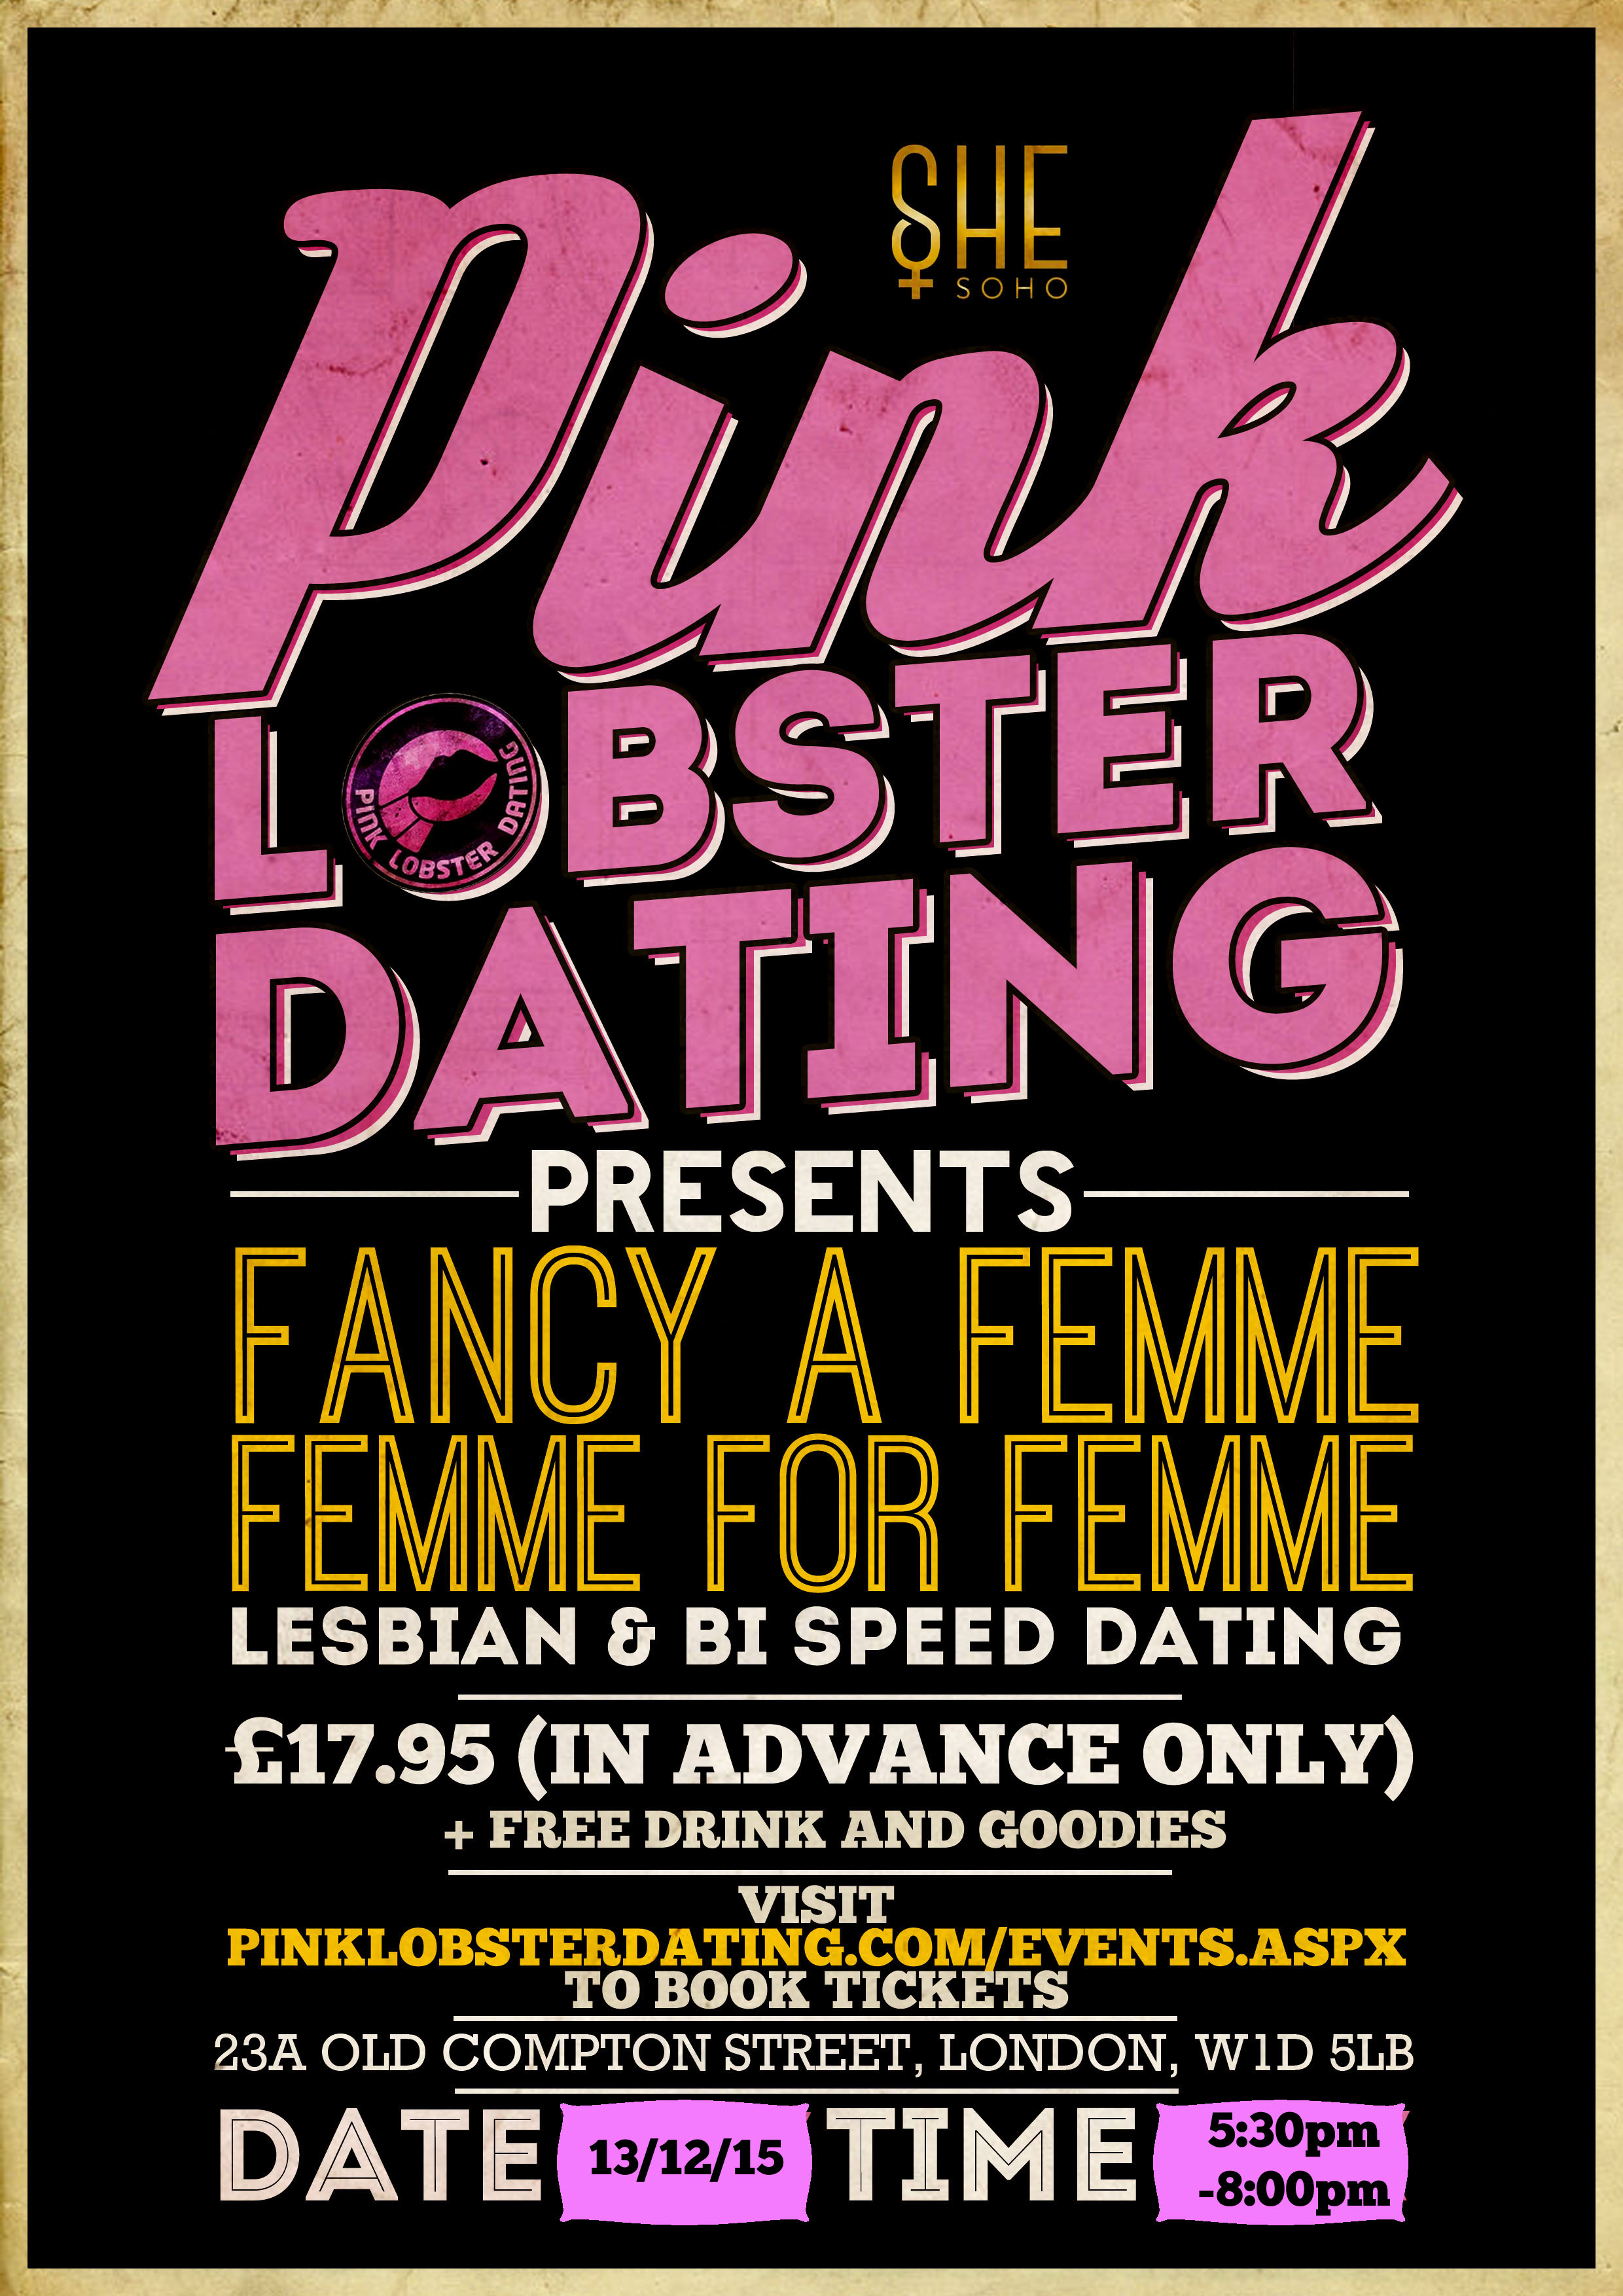 dating events eastbourne)